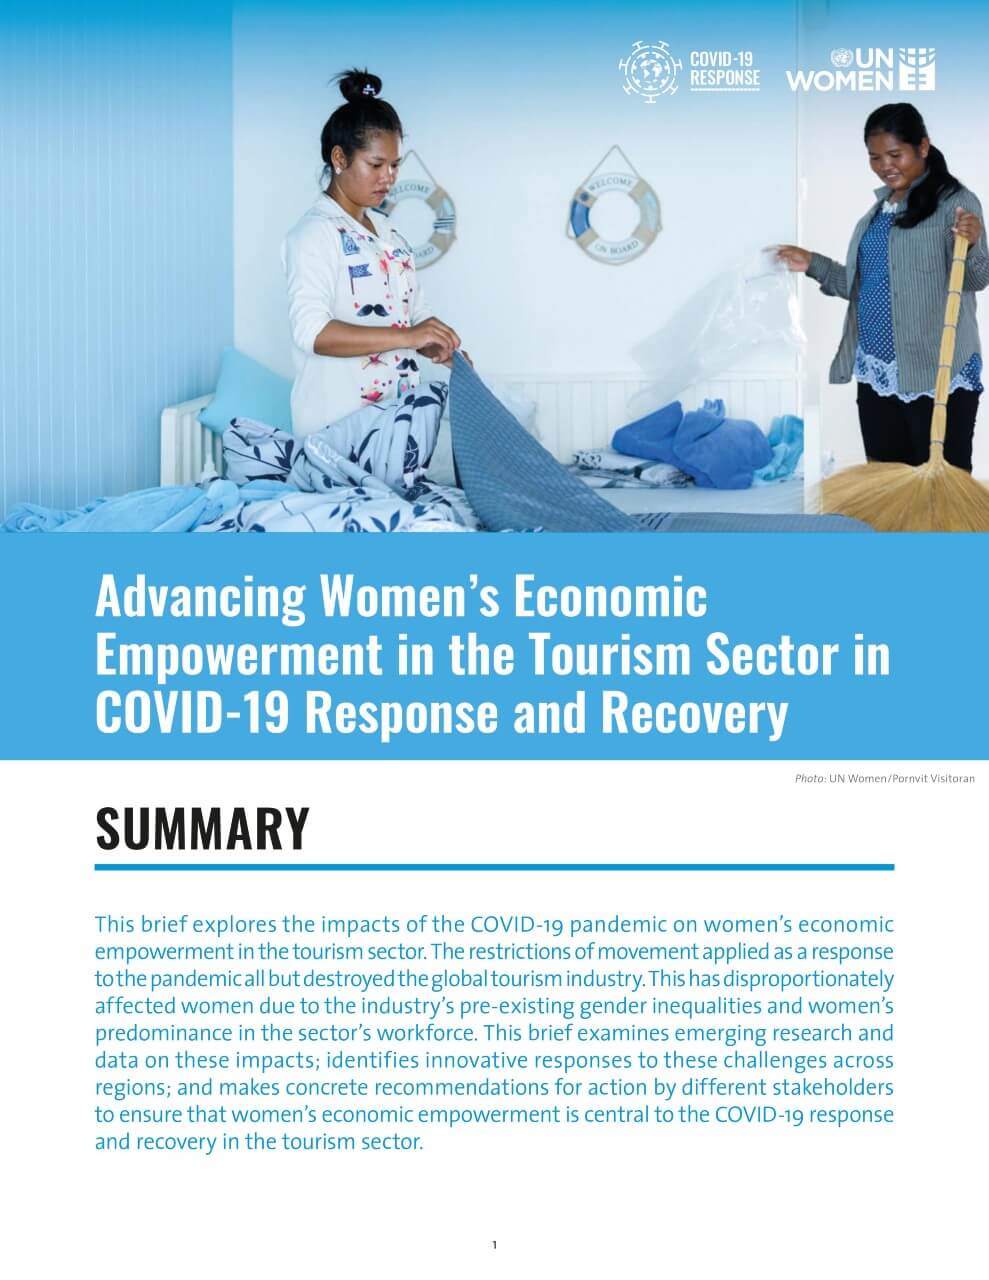 Advancing women’s economic empowerment in the tourism sector in COVID-19 response and recovery